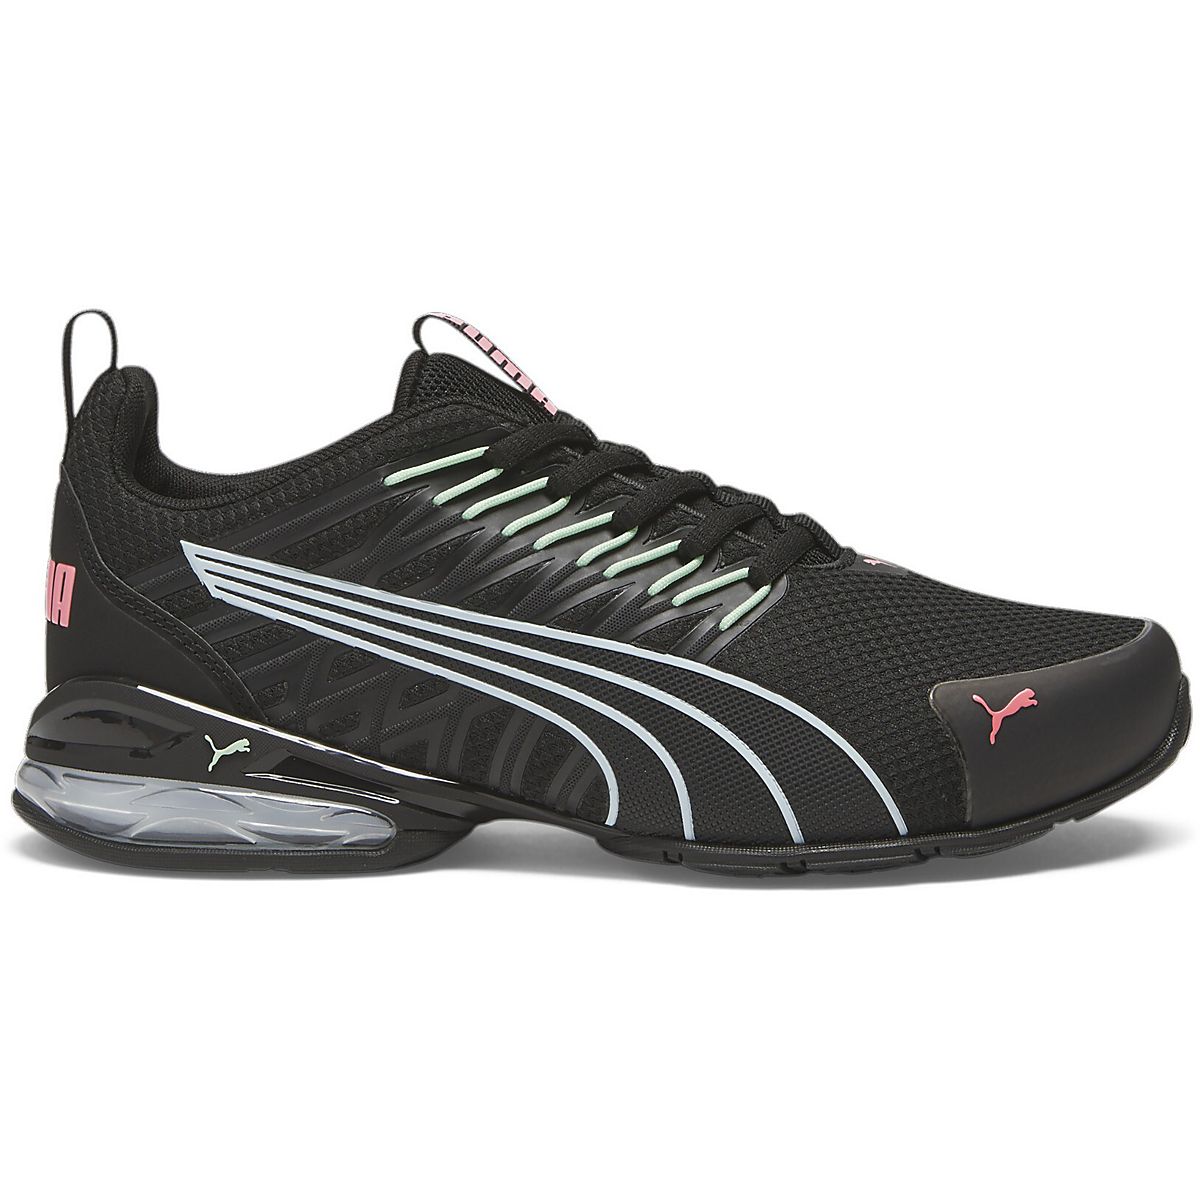 PUMA Women’s Voltaic Evo Running Shoes | Free Shipping at Academy